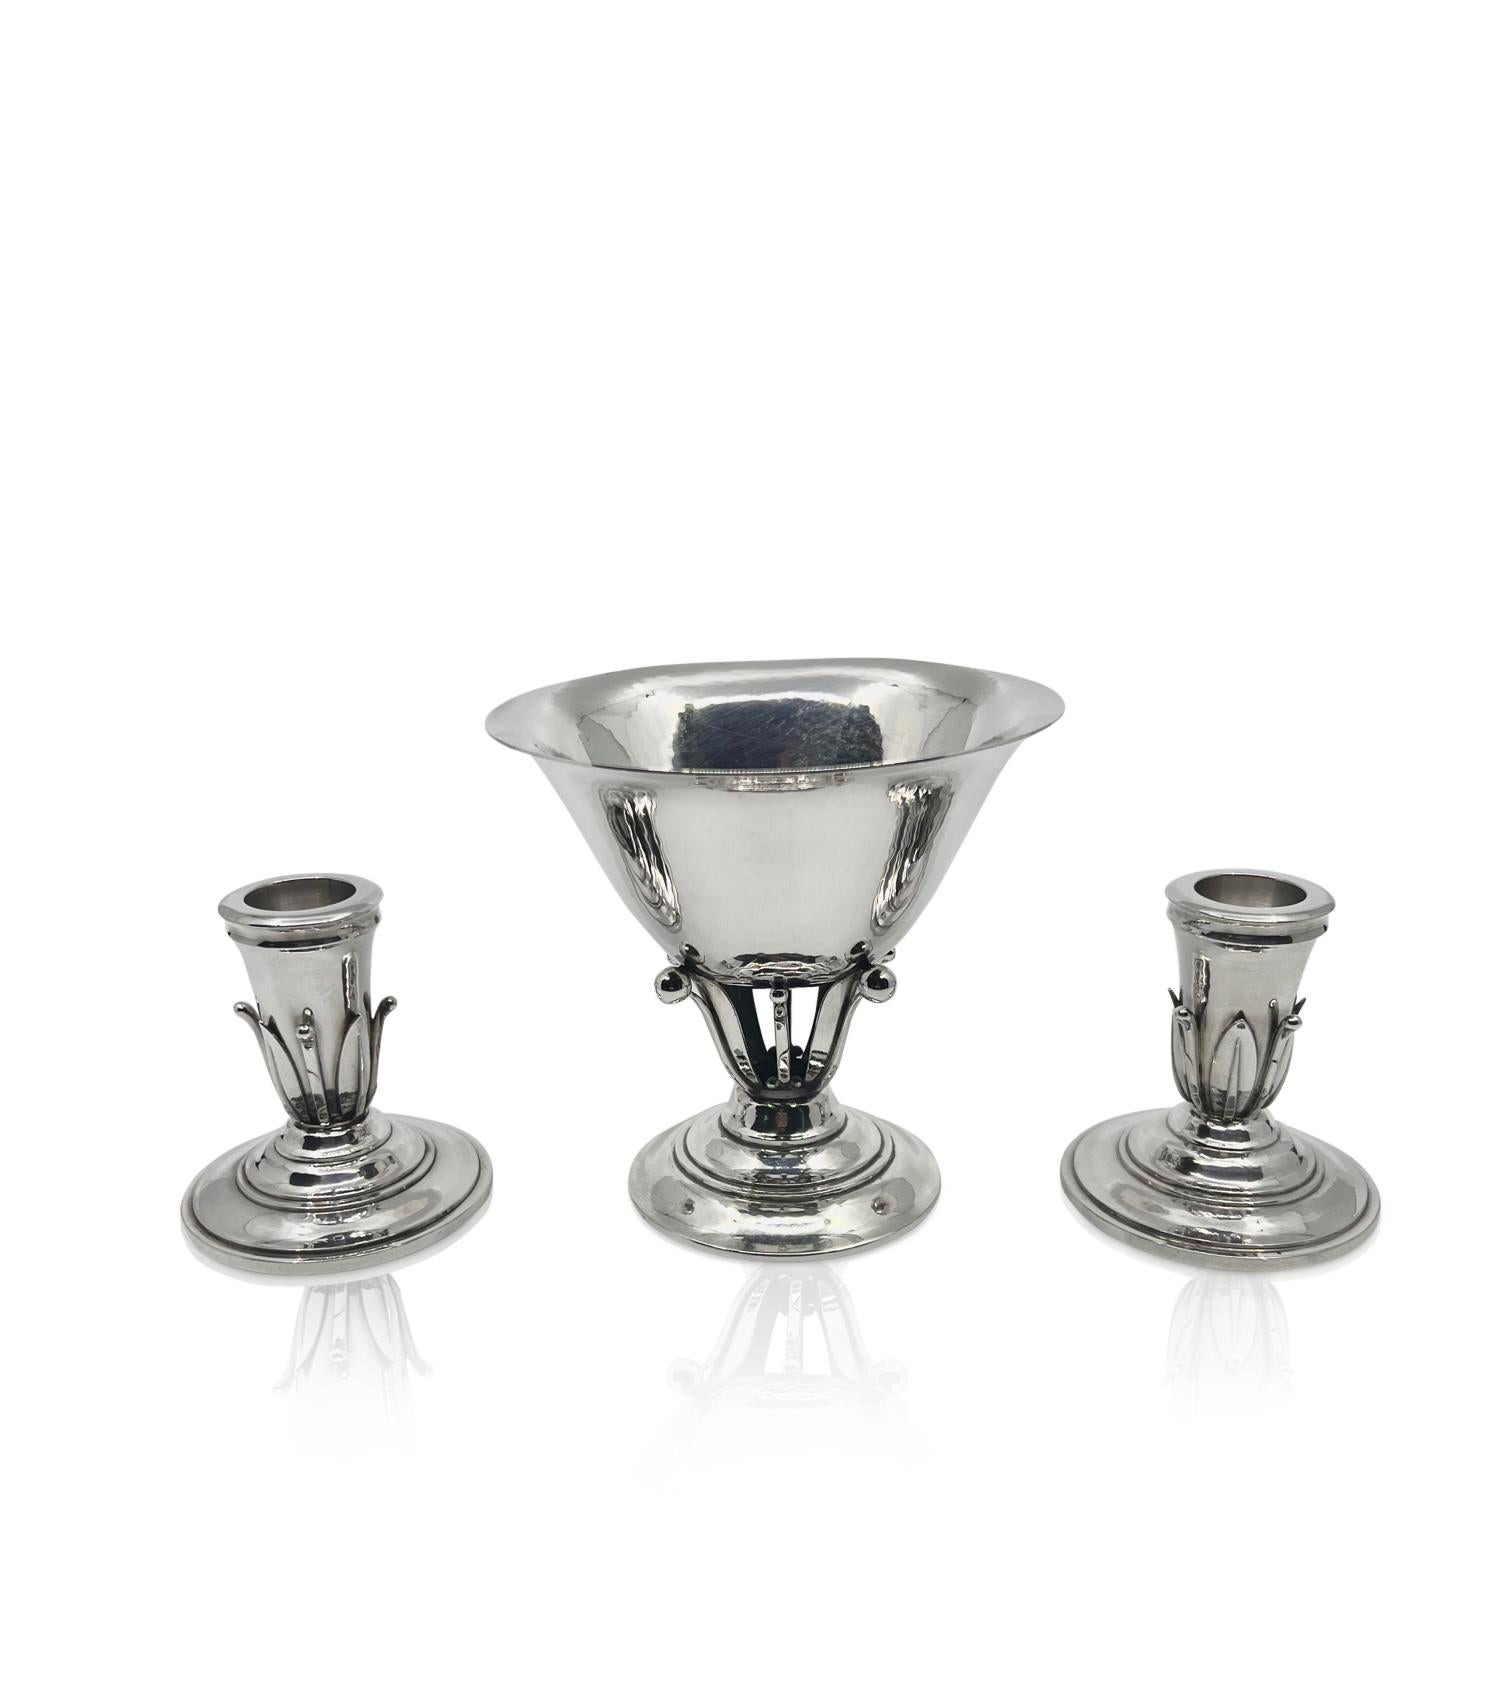 A pair of small Georg Jensen sterling silver candlesticks, design #612 by Johan Rohde from the late 1920s. These match Georg Jensen Johan Rohde small bowl #17. Round base slightly hammered surface and four leaves and stems mounted on each